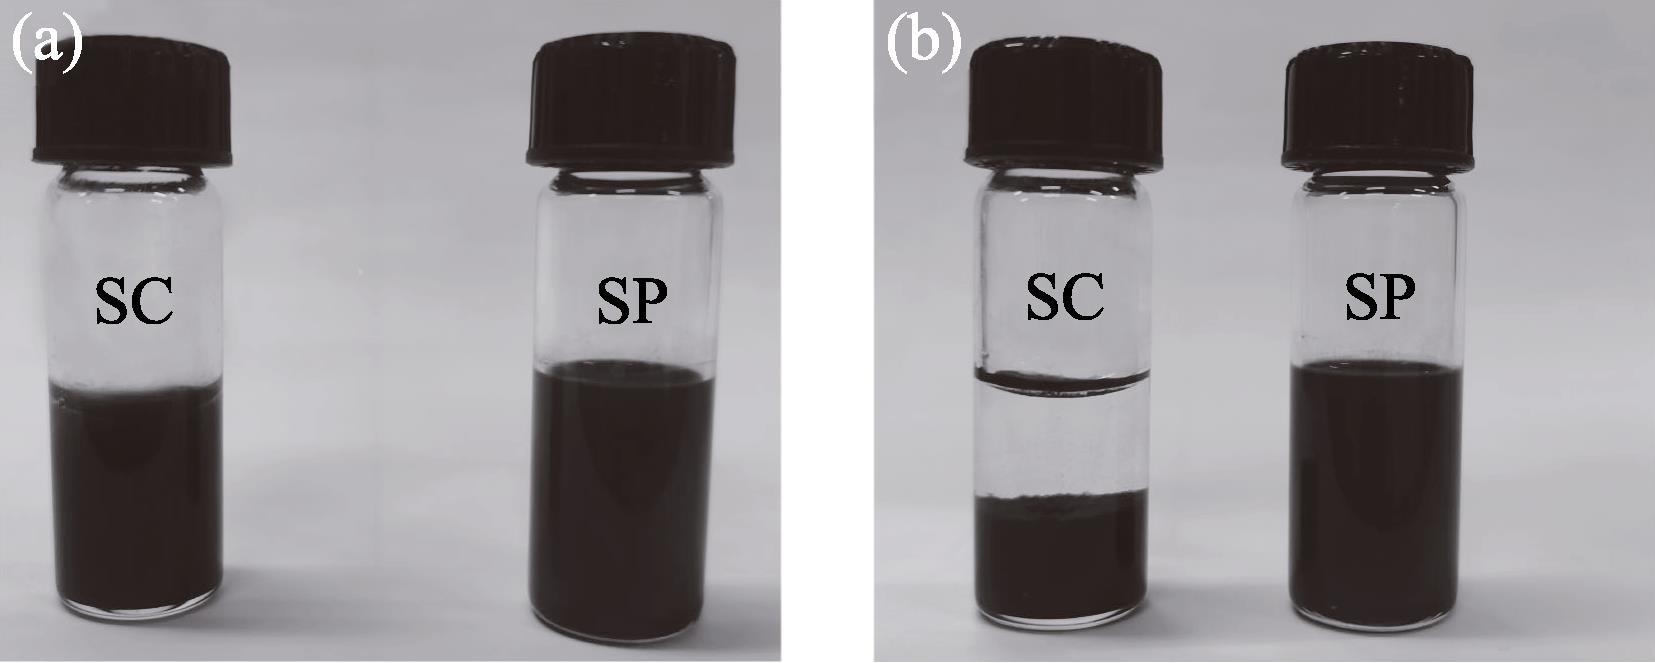 Photographs of NiOx dispersions for (left) spin-coating (SC), for (right) screen-printing (SP) (a) before and (b) after standing for 30 min